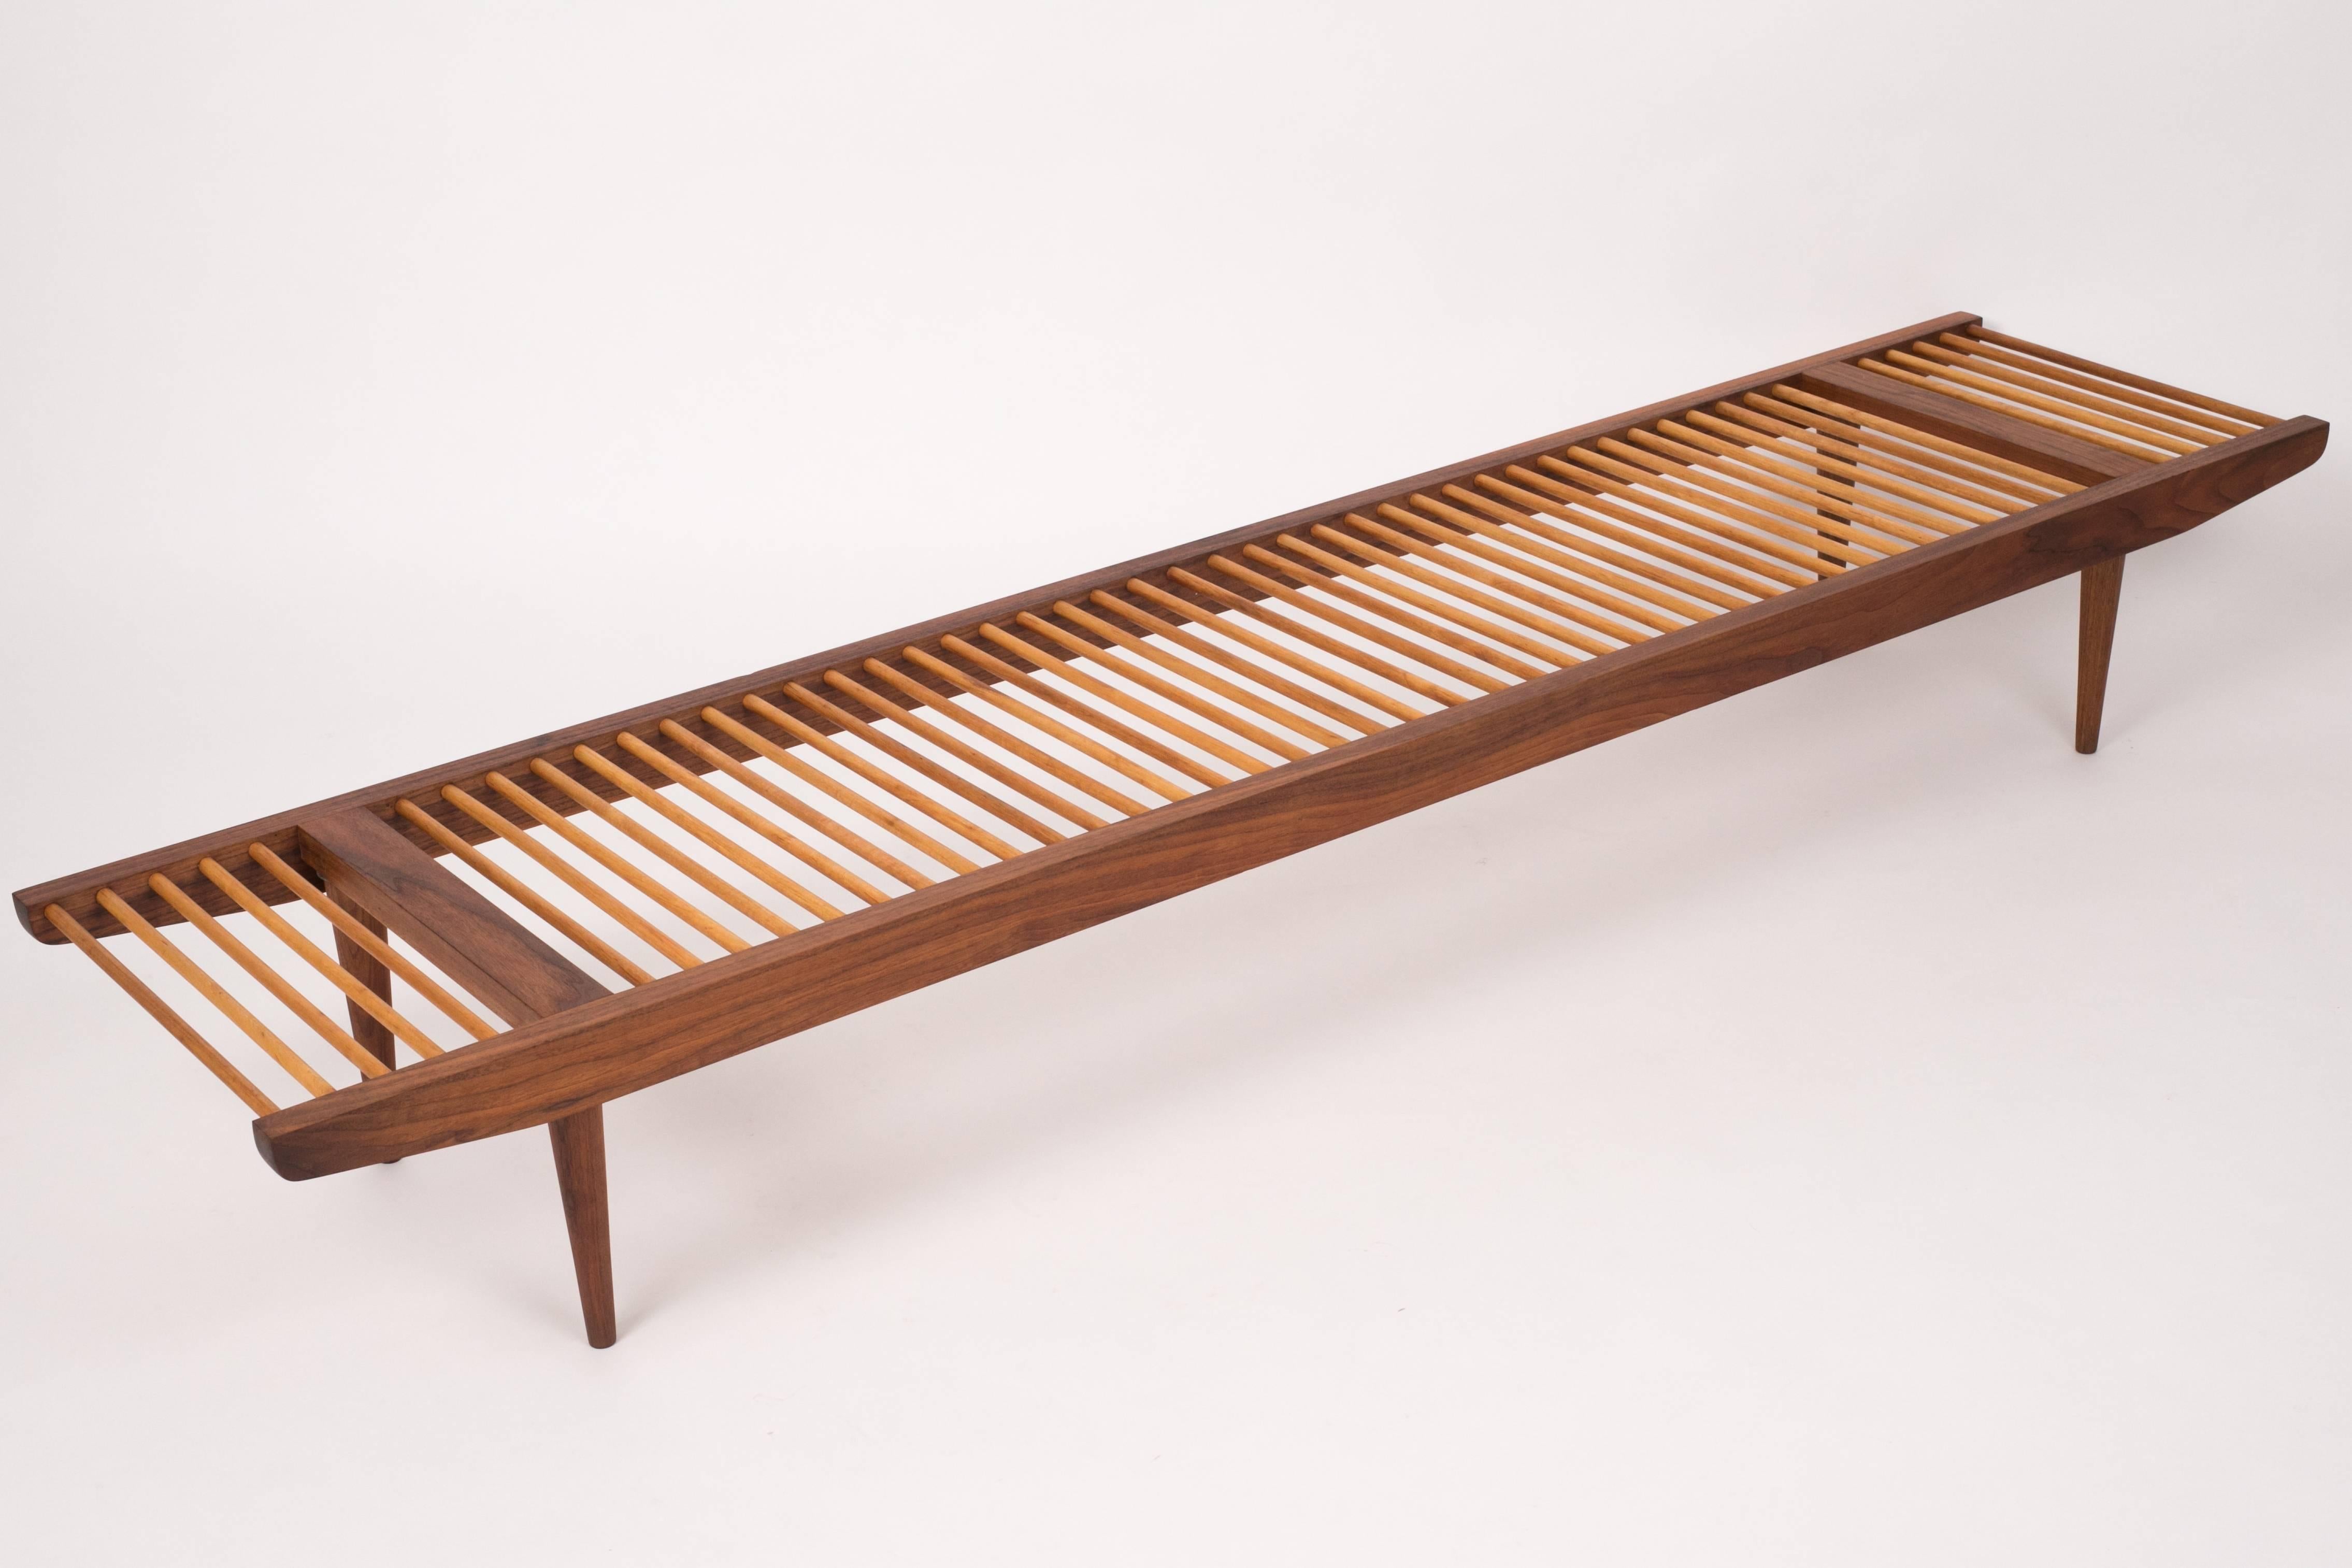 A multifunctional piece designed in the 1950s by Milo Baughman for Glenn of California. Most commonly used as a bench, the piece has a walnut frame that tapers towards each end with walnut spacers and delicate rounded legs. The seat is created from